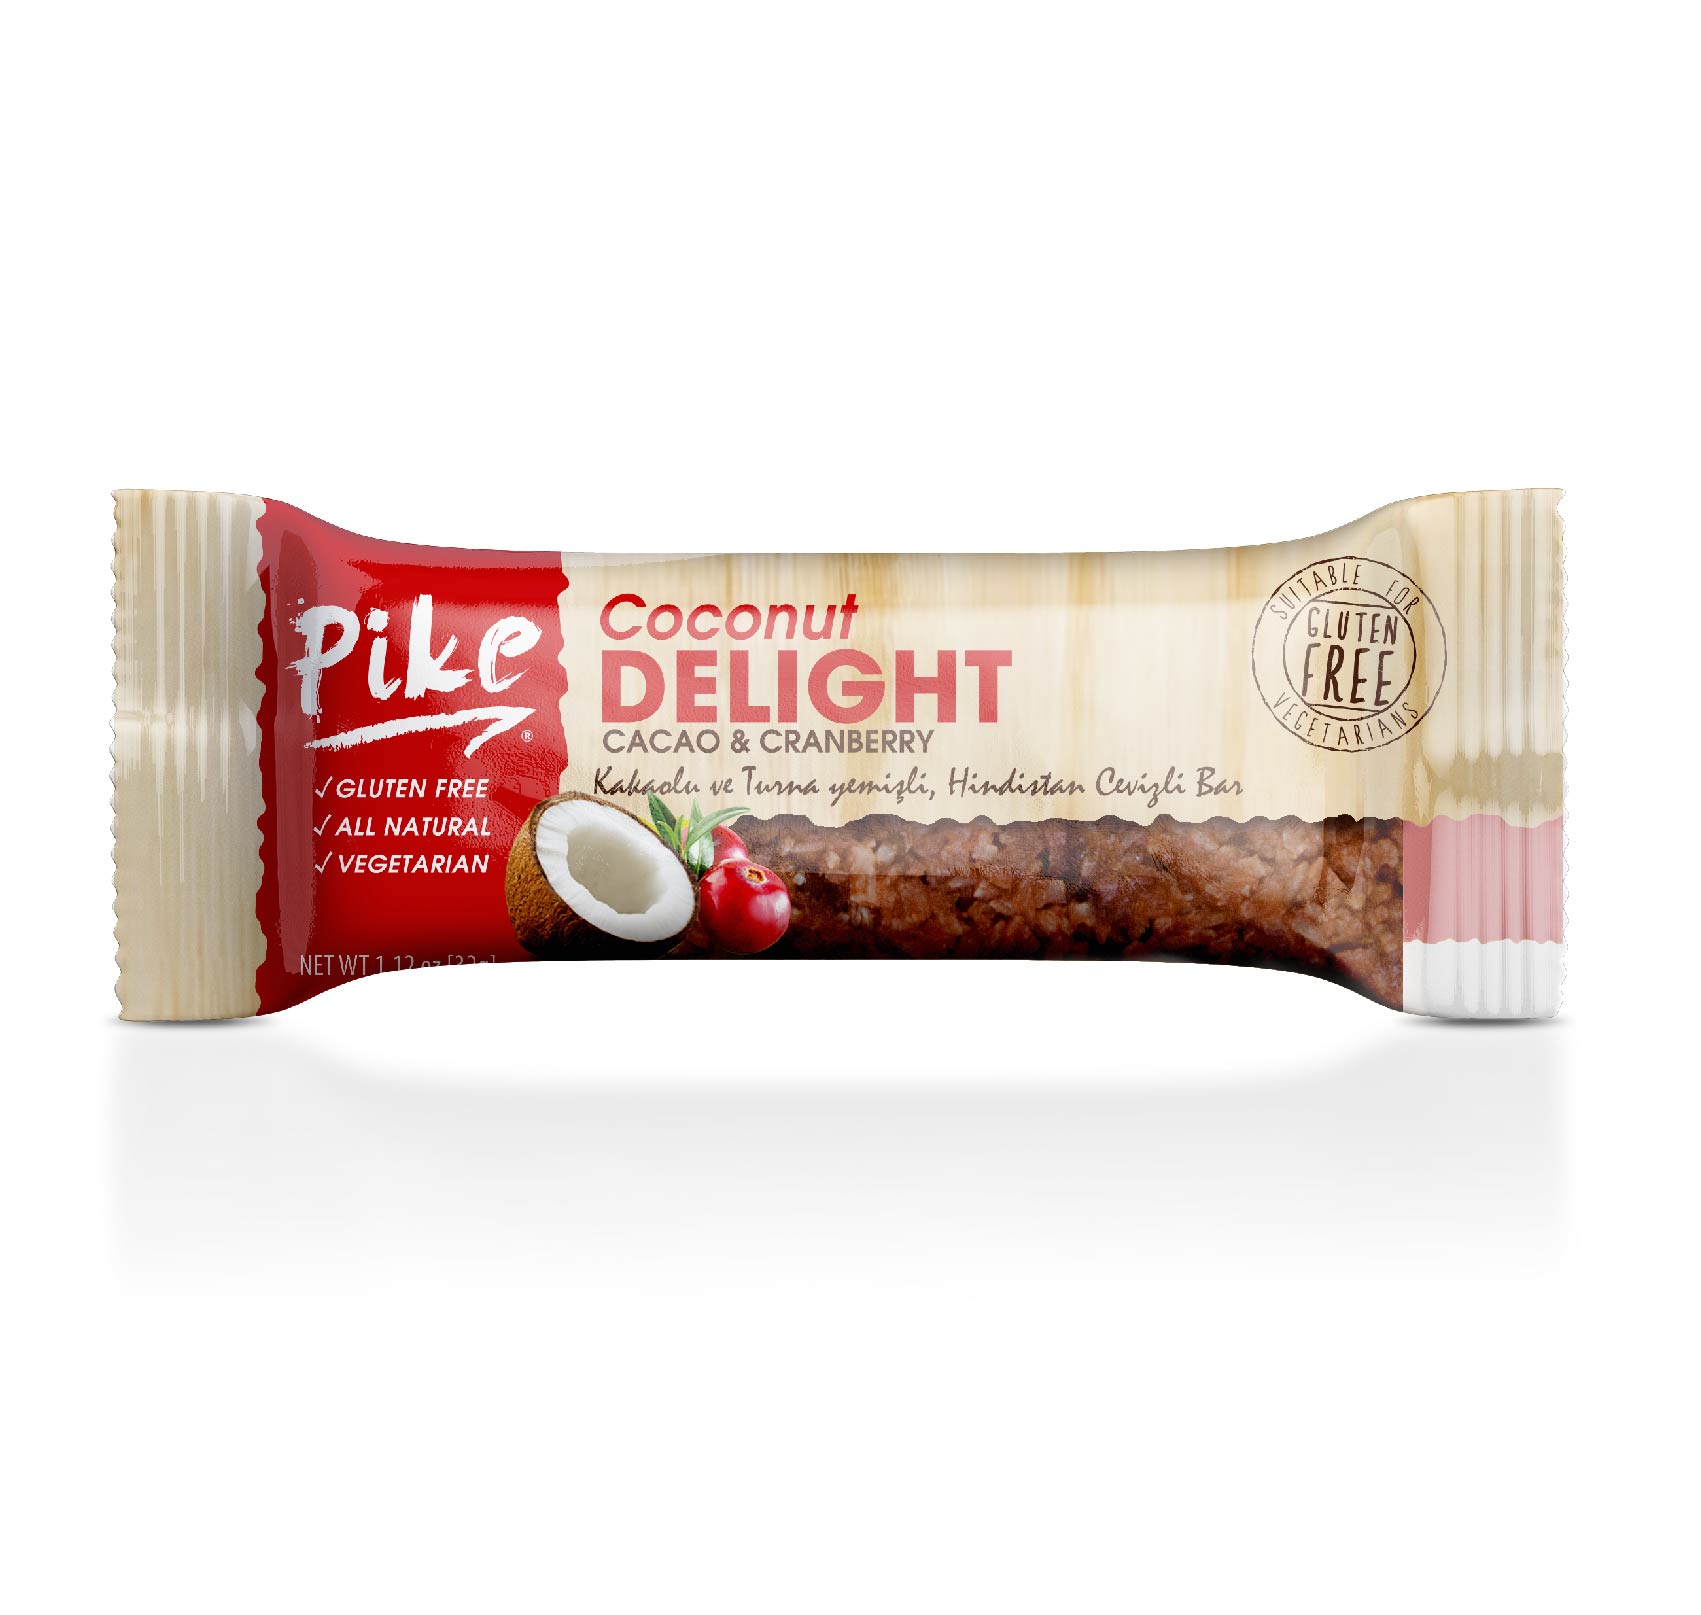 Pike Coconut Delight Cacao & Cranberry Bar 32g